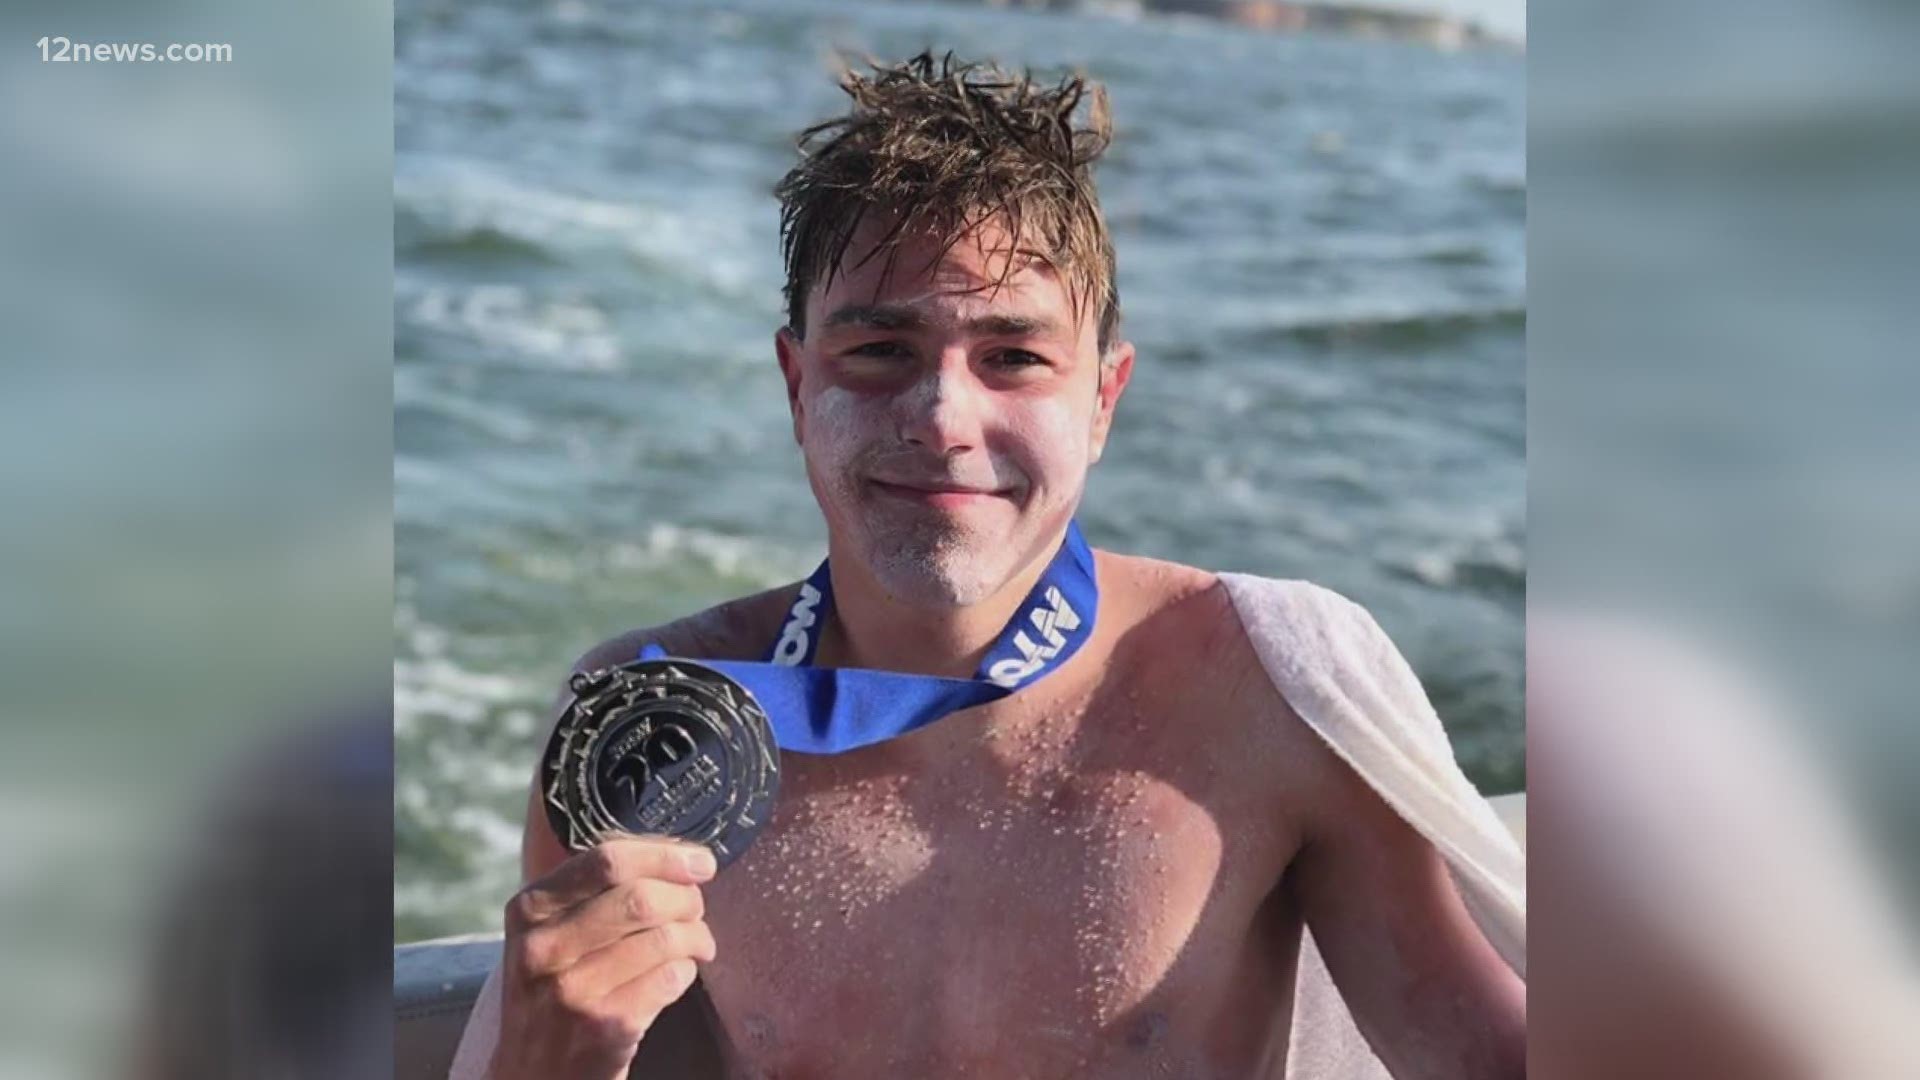 Getting into 59-degree water is enough for most people, but Henry Palmer took it way further. The Brophy Prep senior swam more than 14 miles in it.